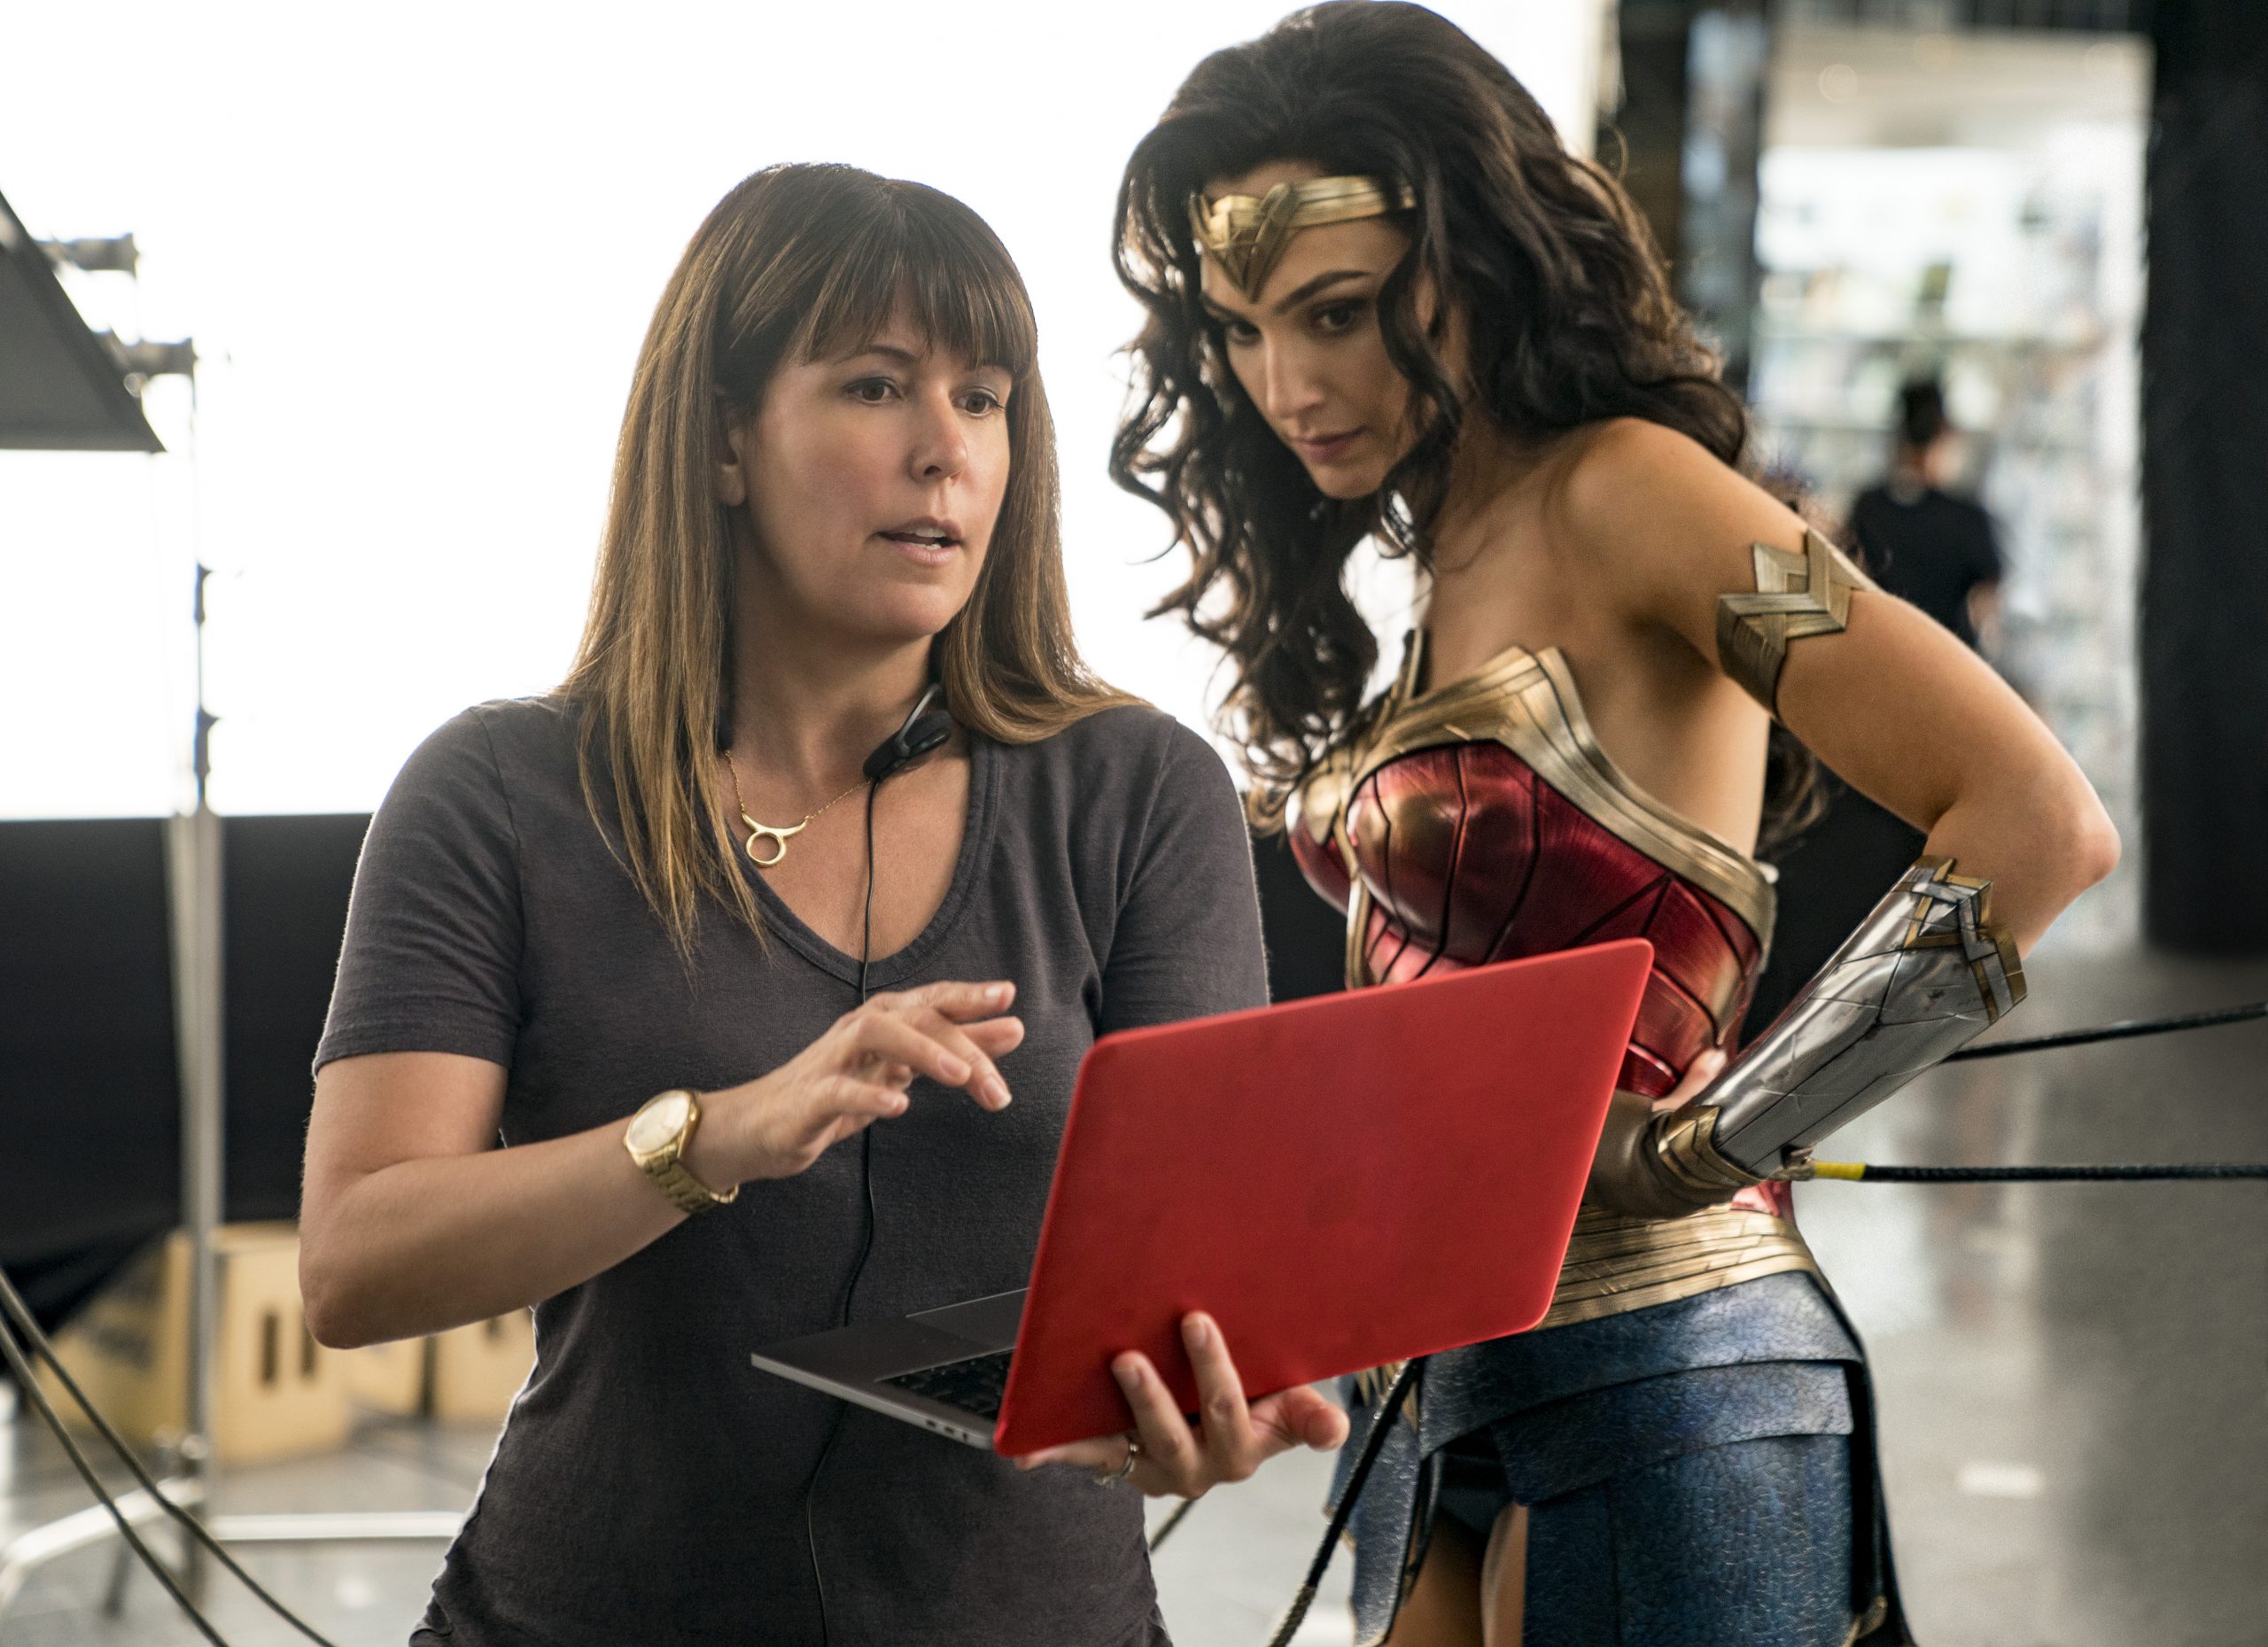 What If Wonder Woman 1984 Was Set In 2020? Patty Jenkins Weighs In